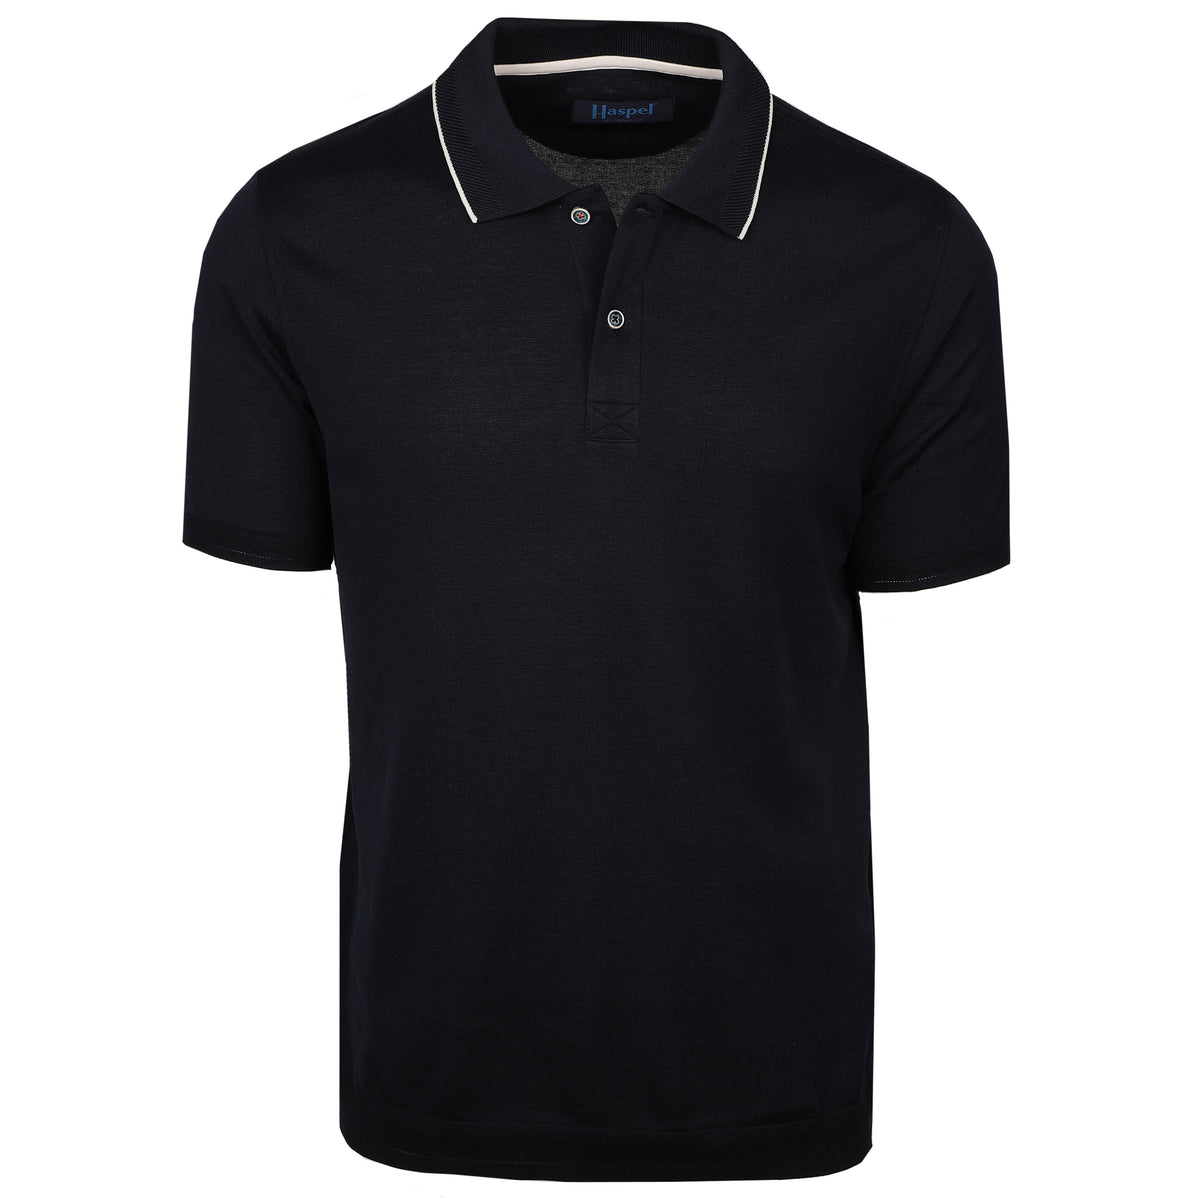 Our Sorrento Navy Fine Ribbed Light Weight Polo is your ticket to looking smart and feeling comfy on the course, pool, or beach. Whether you’re looking to make a statement on the links or just chill out in style, this navy polo is perfect for any occasion. Lightweight and finely ribbed, this polo is sure to keep you feeling fine and free!